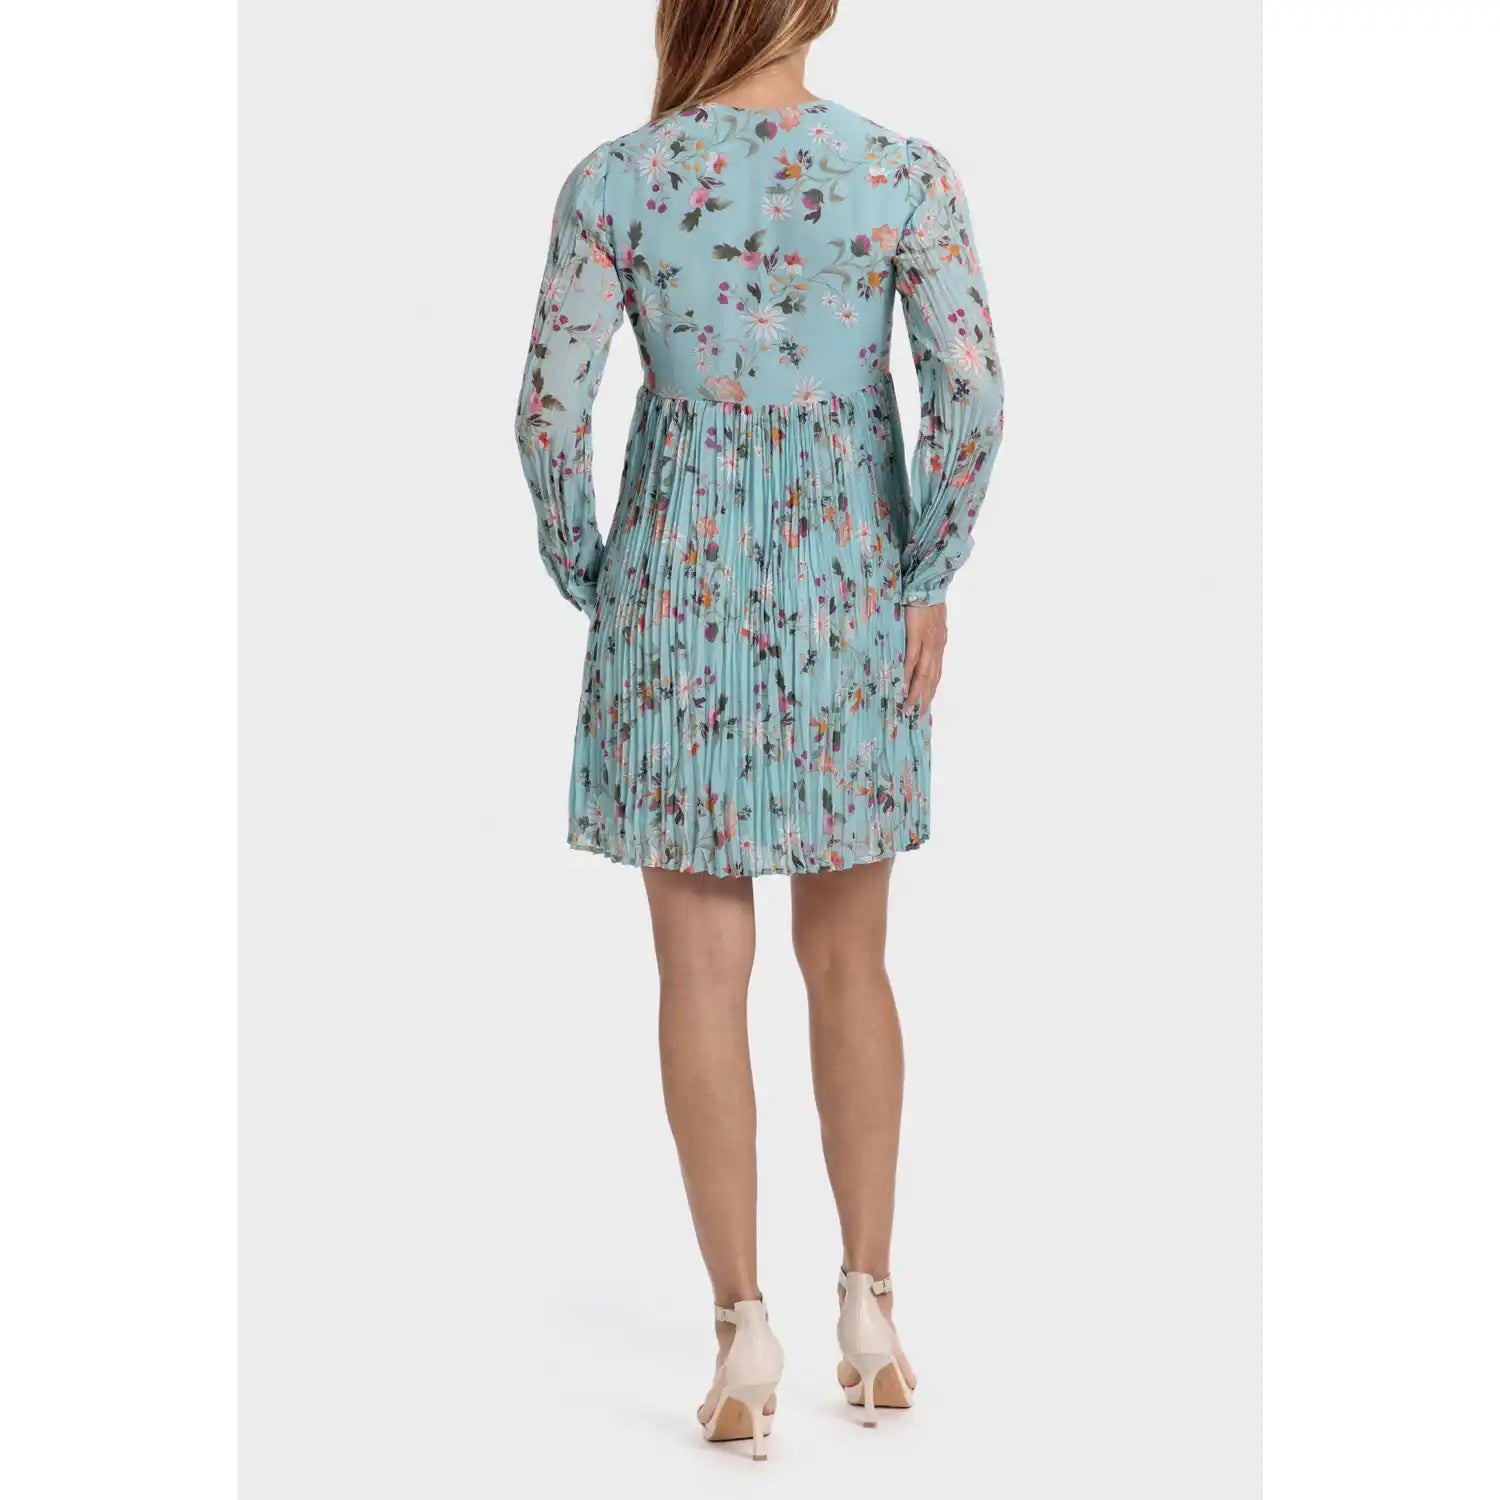 Punt Roma Pleated Printed Dress - Blue 4 Shaws Department Stores